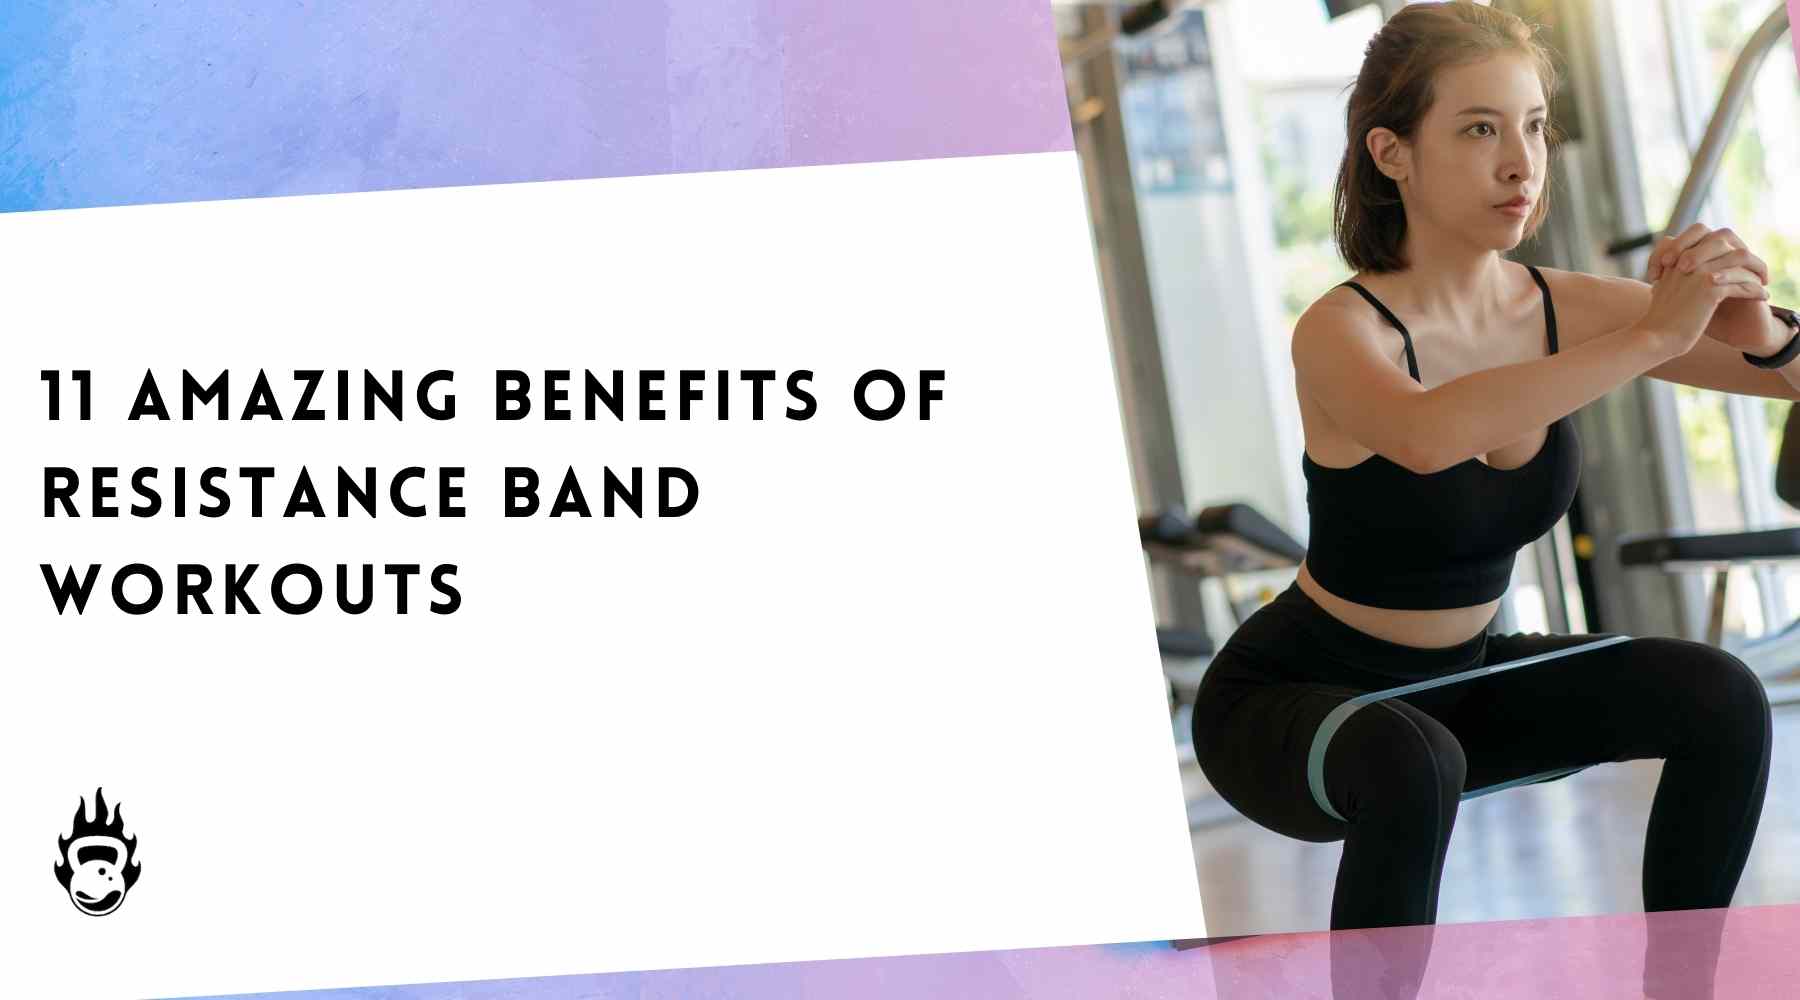 5 Potential Health Benefits of Resistance Band Training